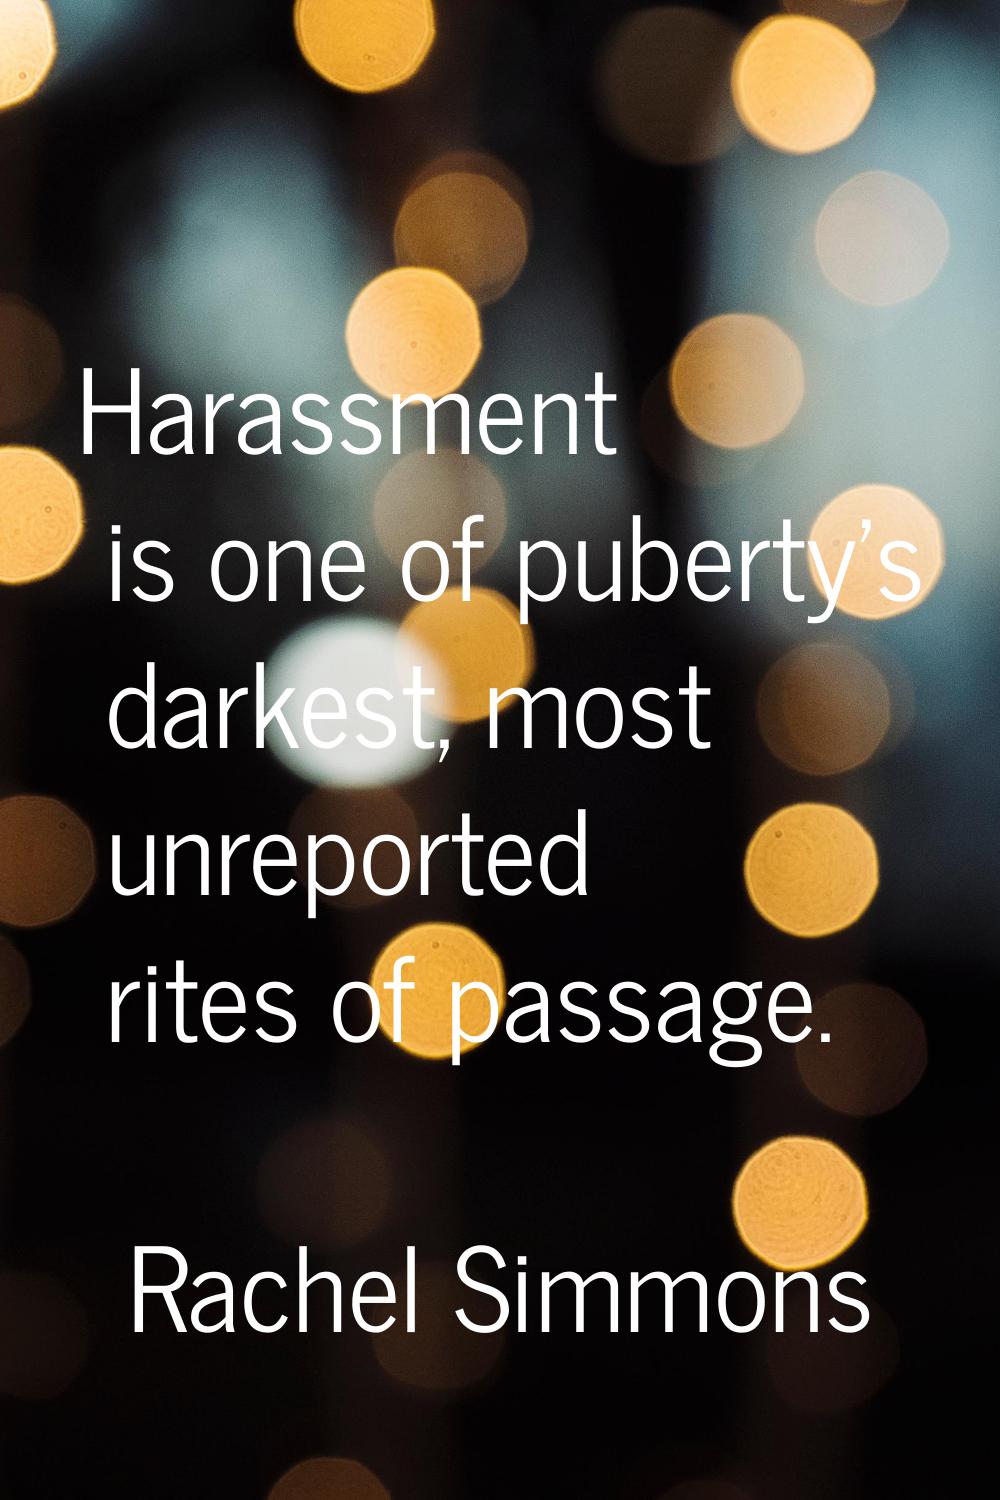 Harassment is one of puberty's darkest, most unreported rites of passage.